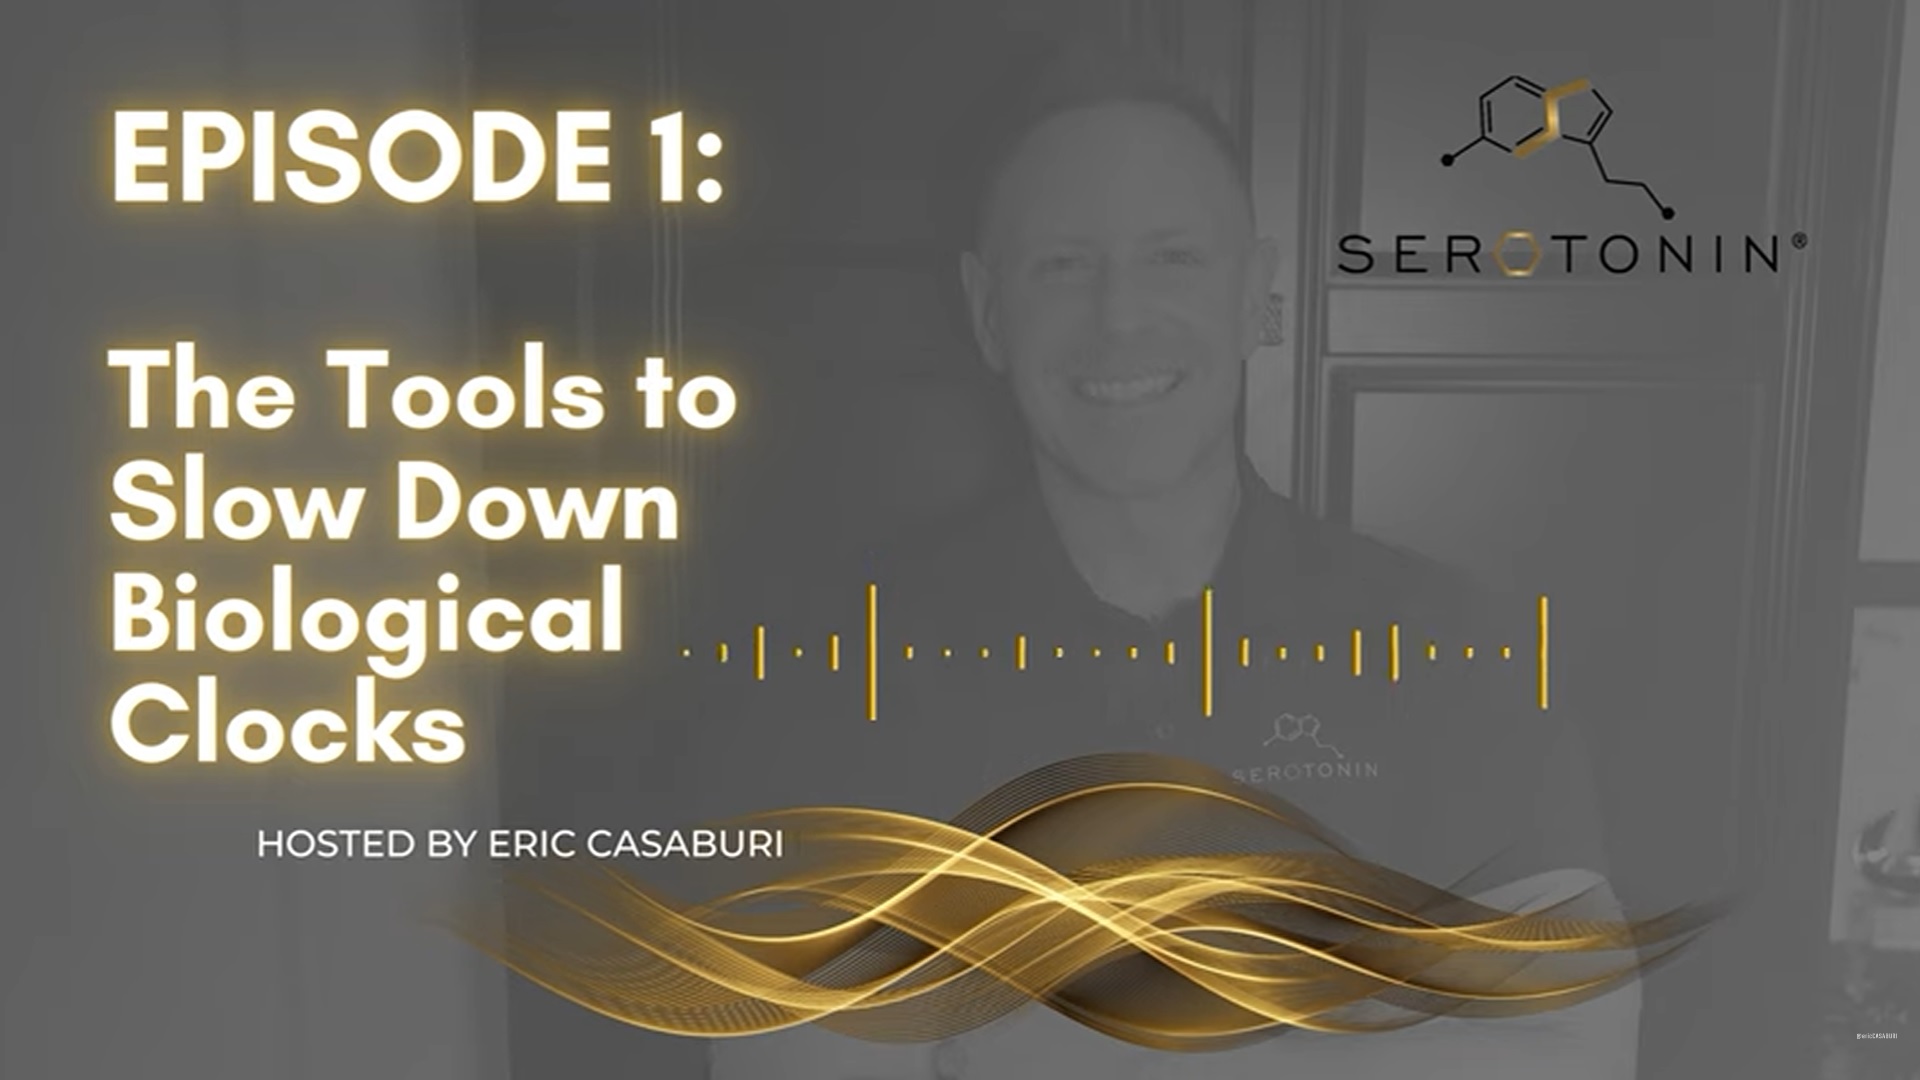 Episode 1: The Tools to Slow Down Biological Clocks